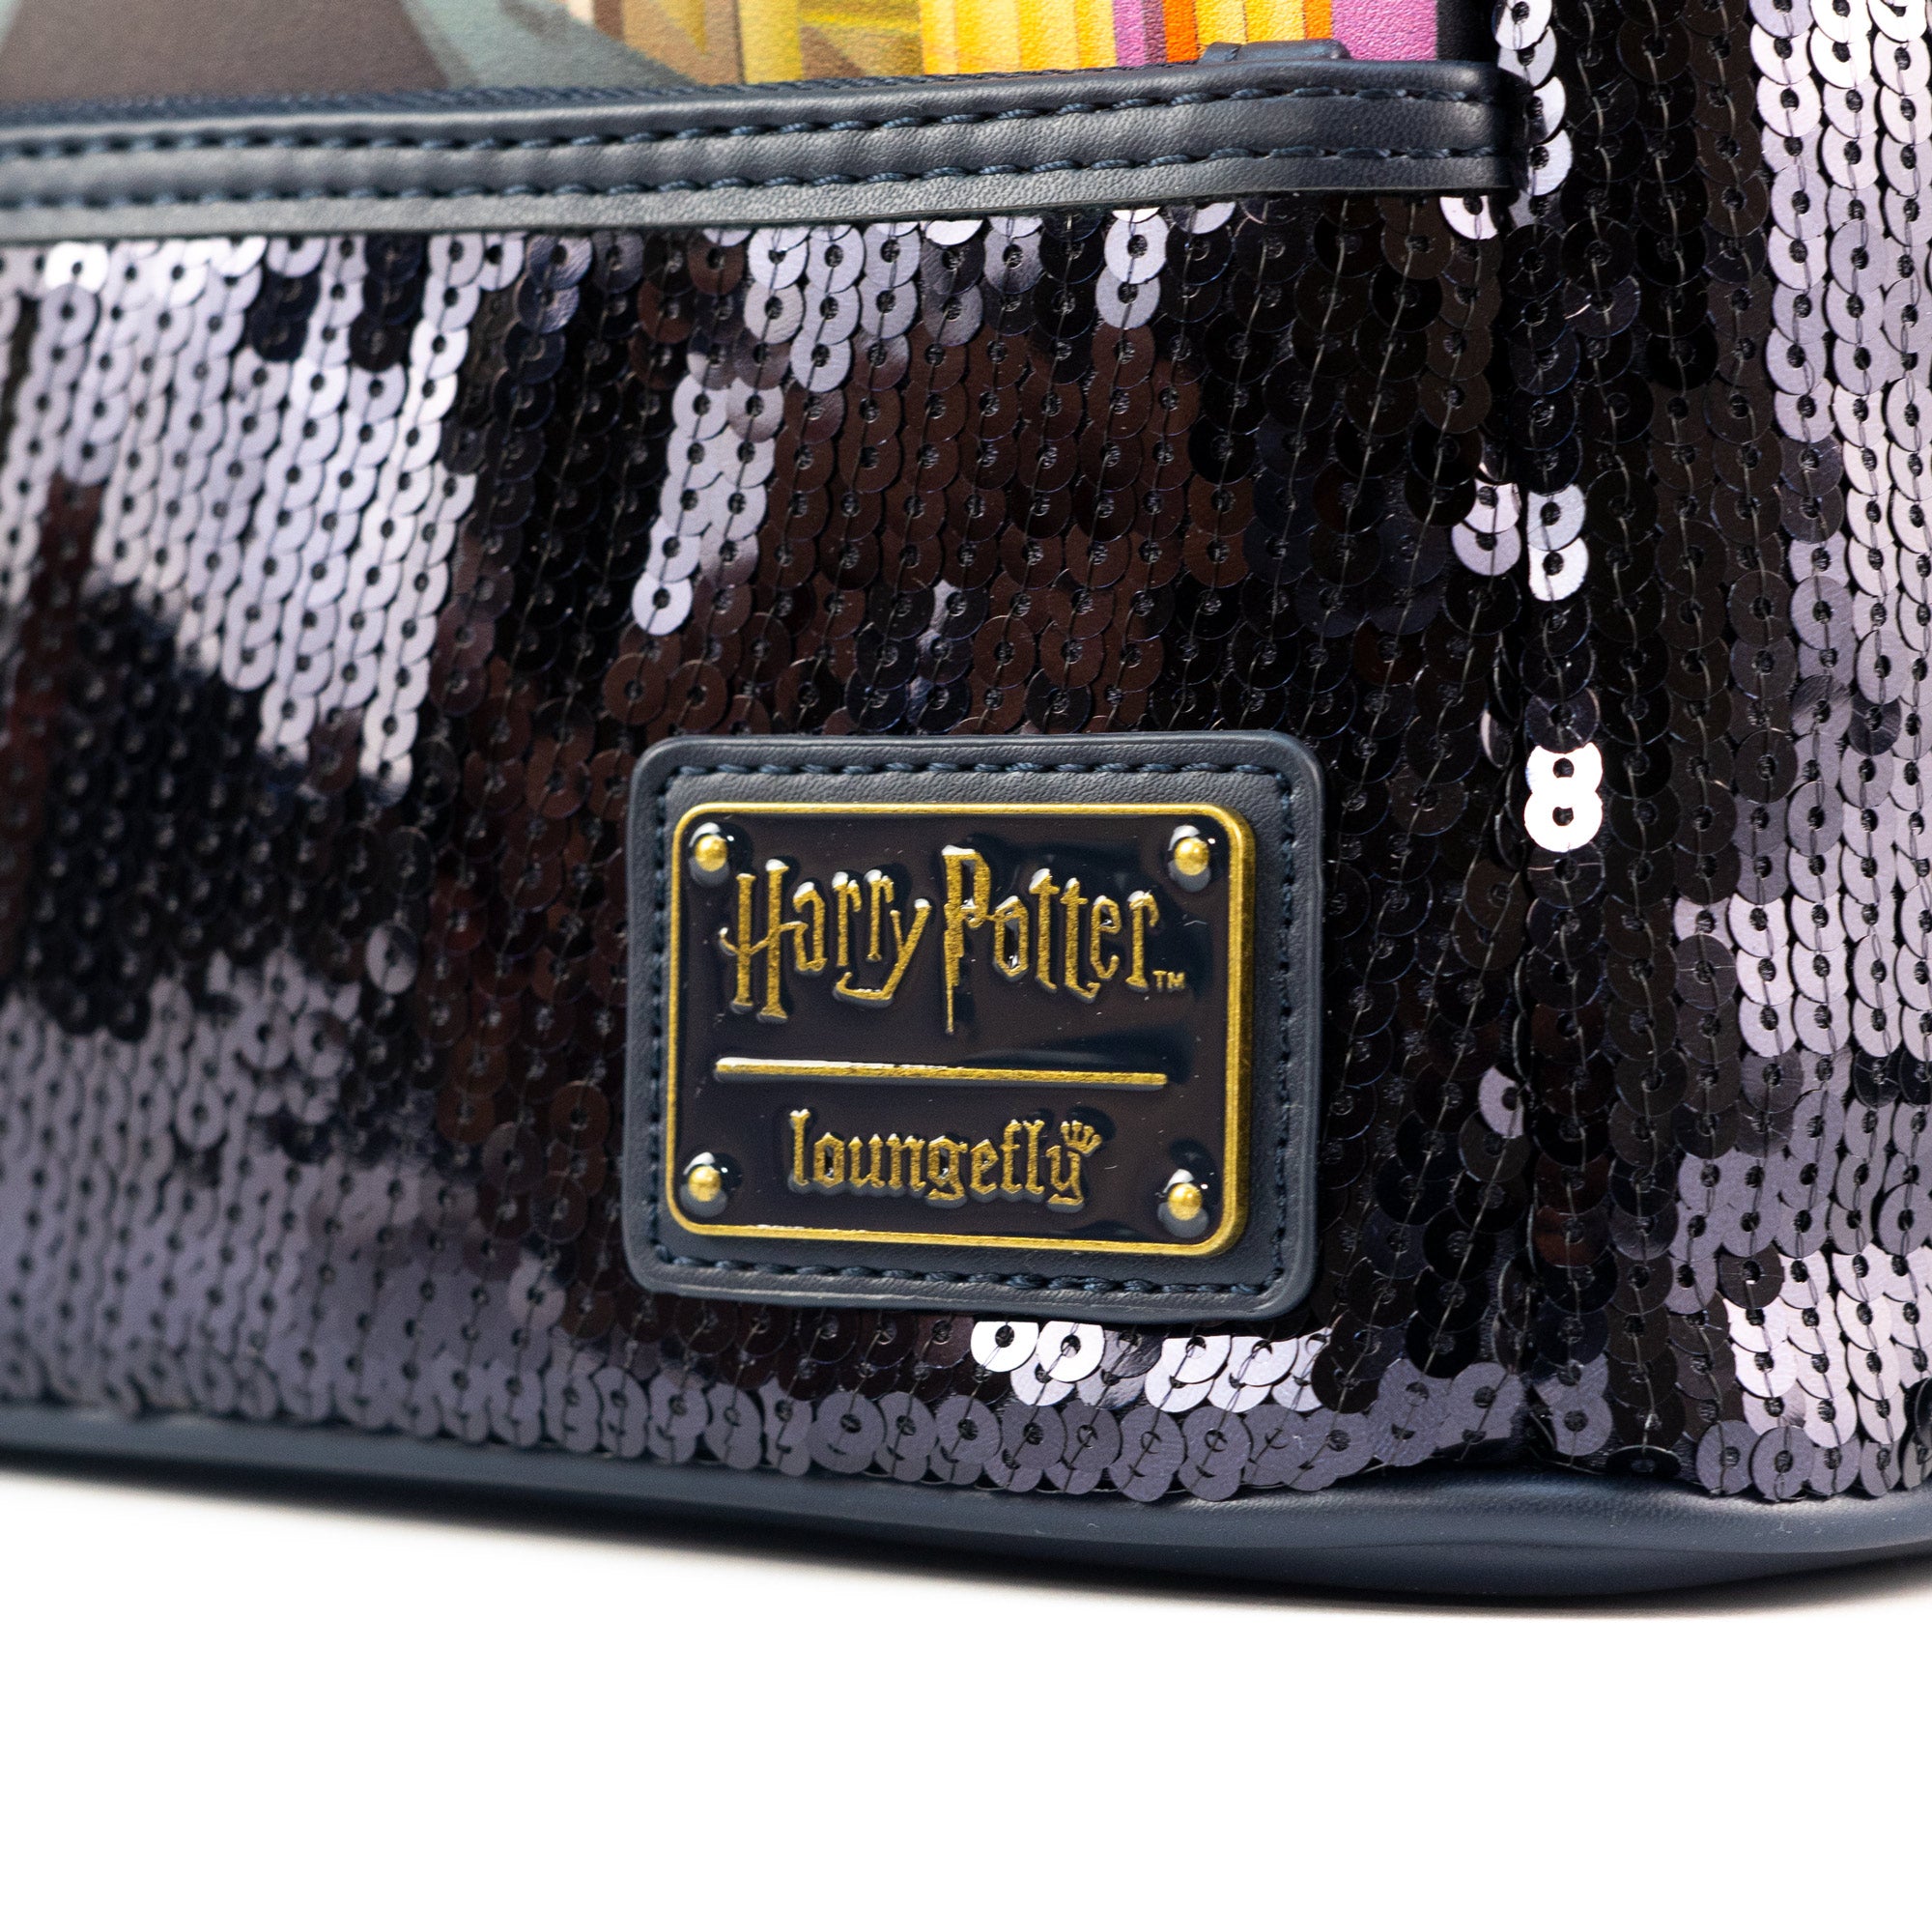 Loungefly x Harry Potter Diagon Alley Sequin Mini Backpack